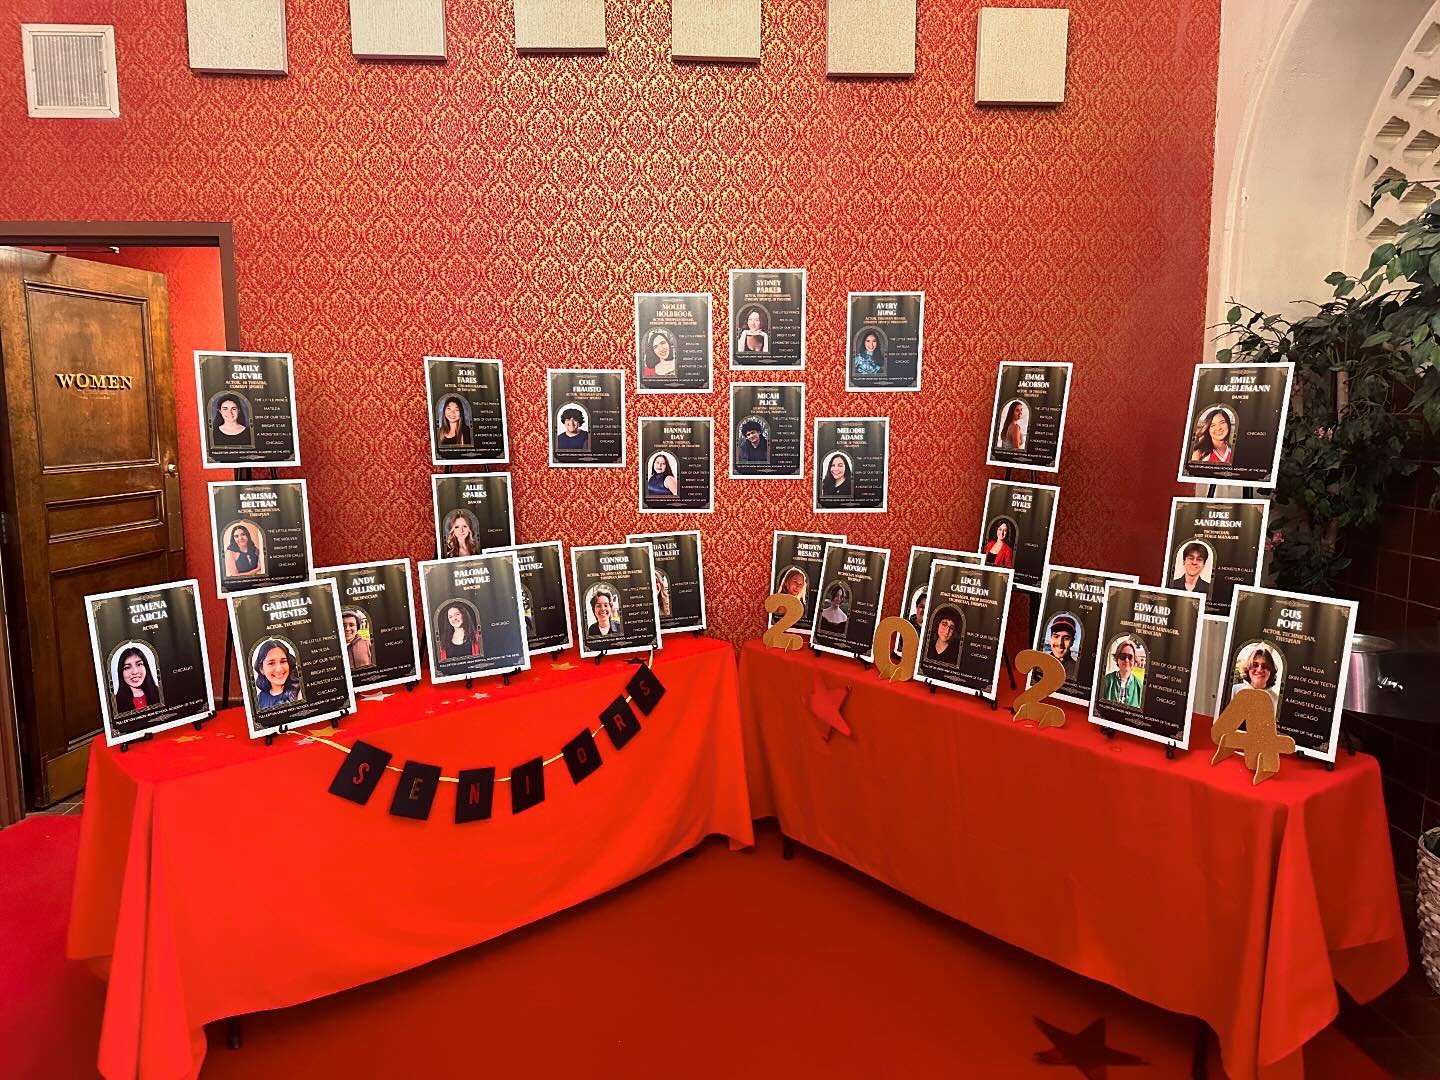 Thank you to the FUHS Theatre Booster Club for organizing this display of our 28 graduating Seniors who are part of CHICAGO. I will miss seeing these students on our FUHS stages. #wearethearts #classof2024